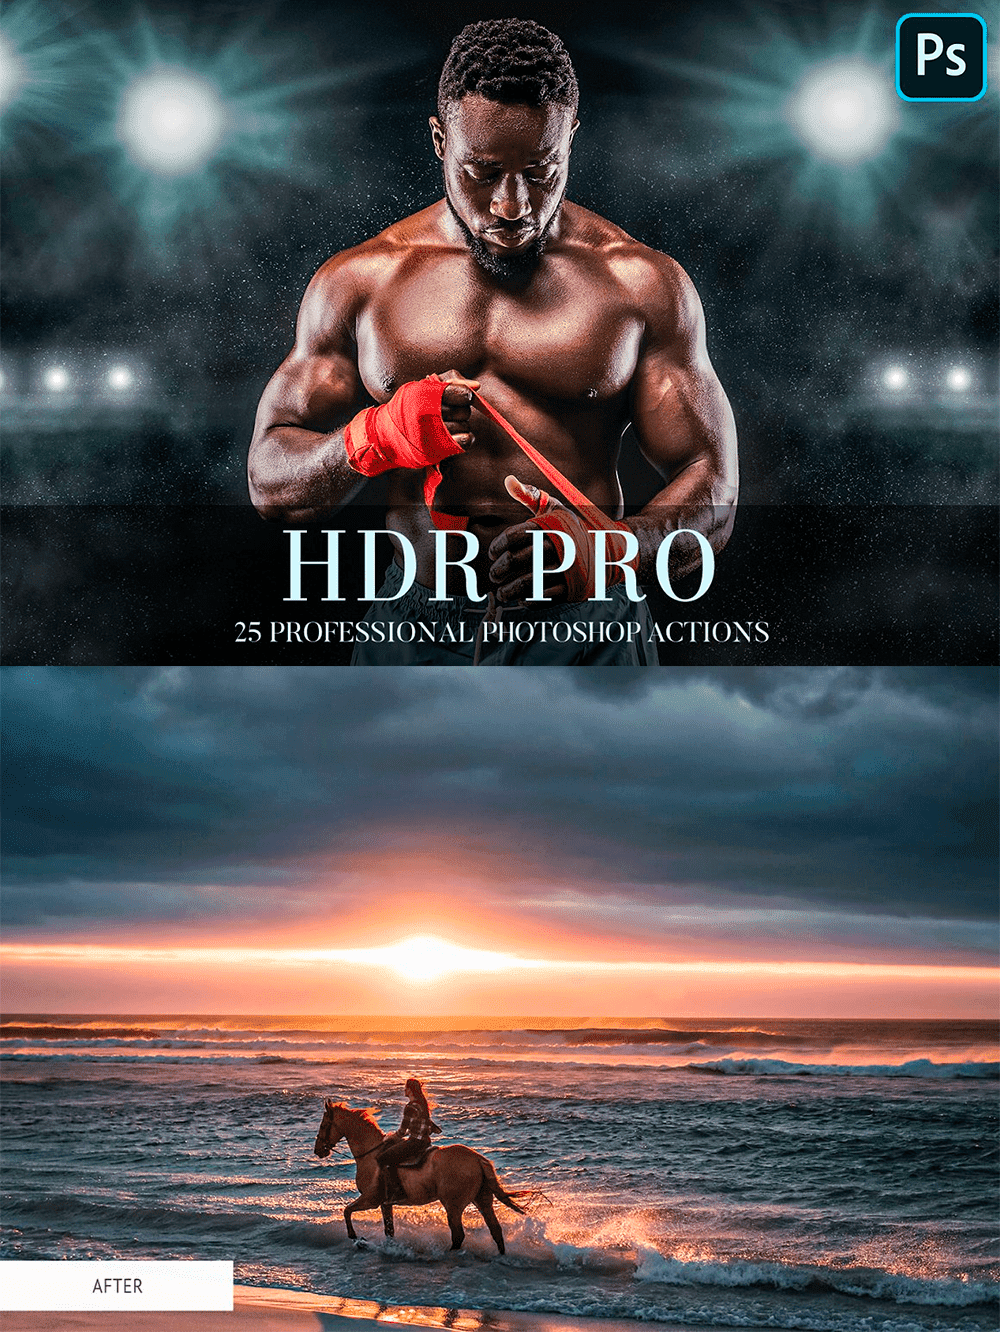 Photoshop actions hdr pro, picture for pinterest 1000x1331.